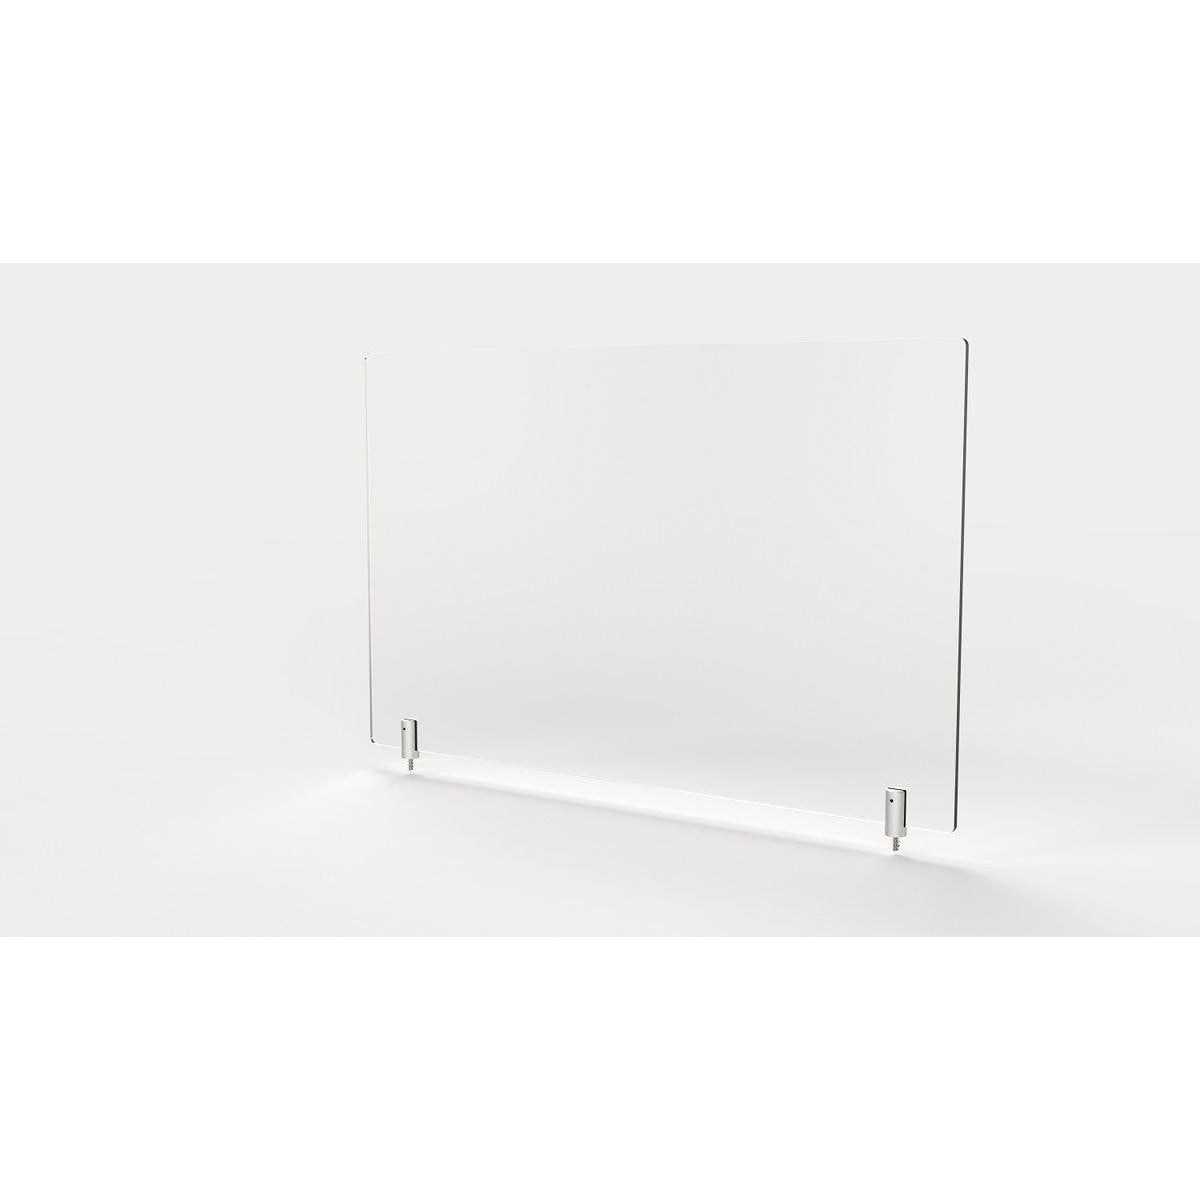 Frosted Thermoplastic Partition & Cubicle Extender with Permanent Screw Attachment, 18"H x 42"W